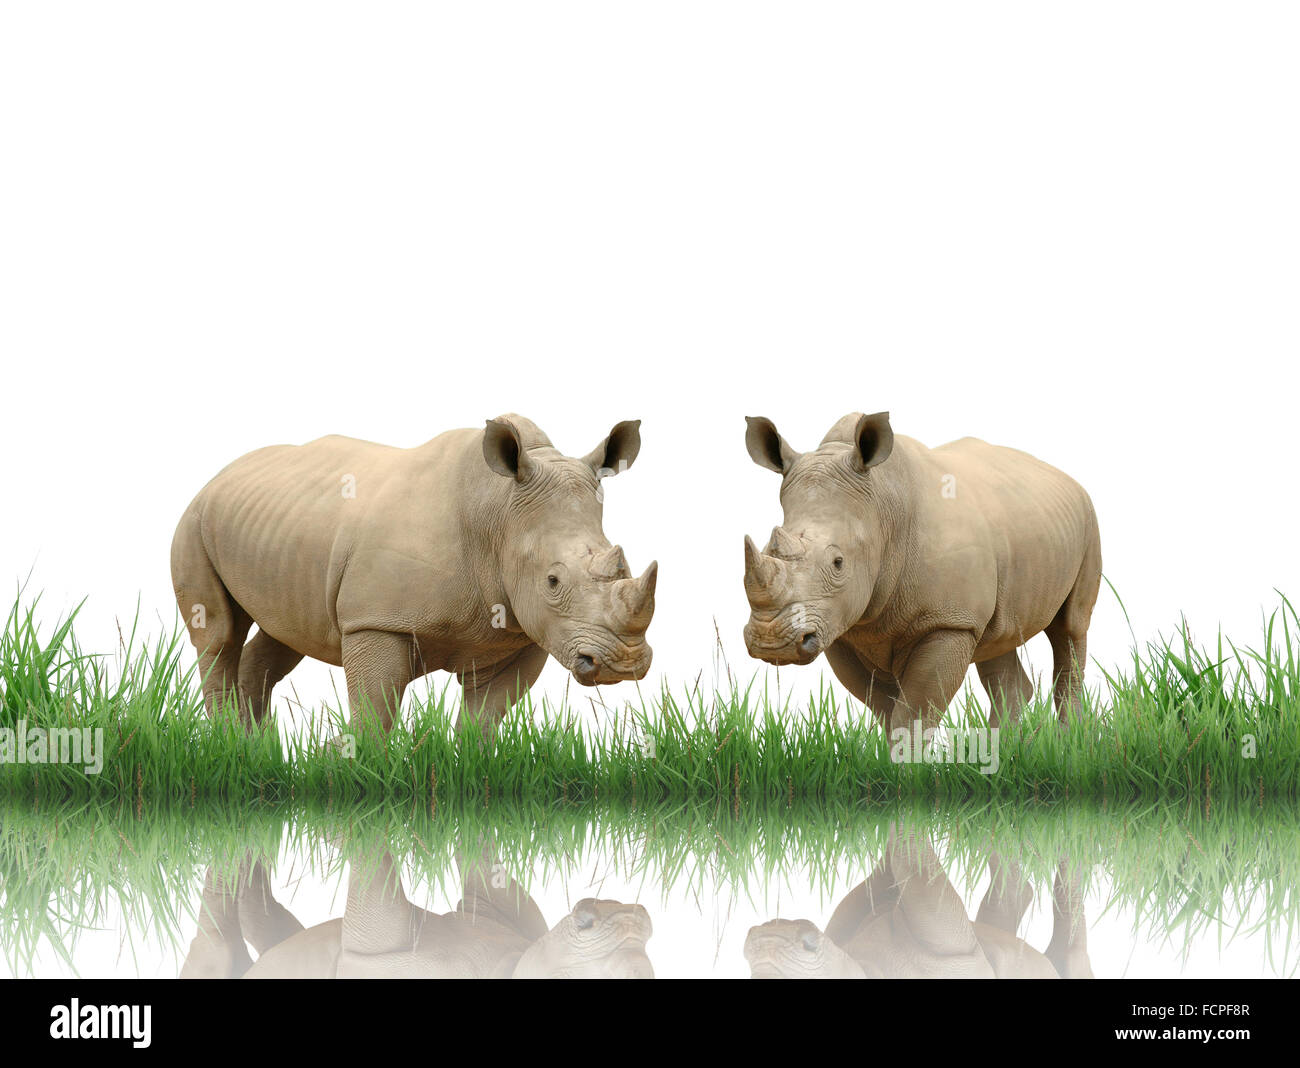 rhinoceros with green grass isolated Stock Photo